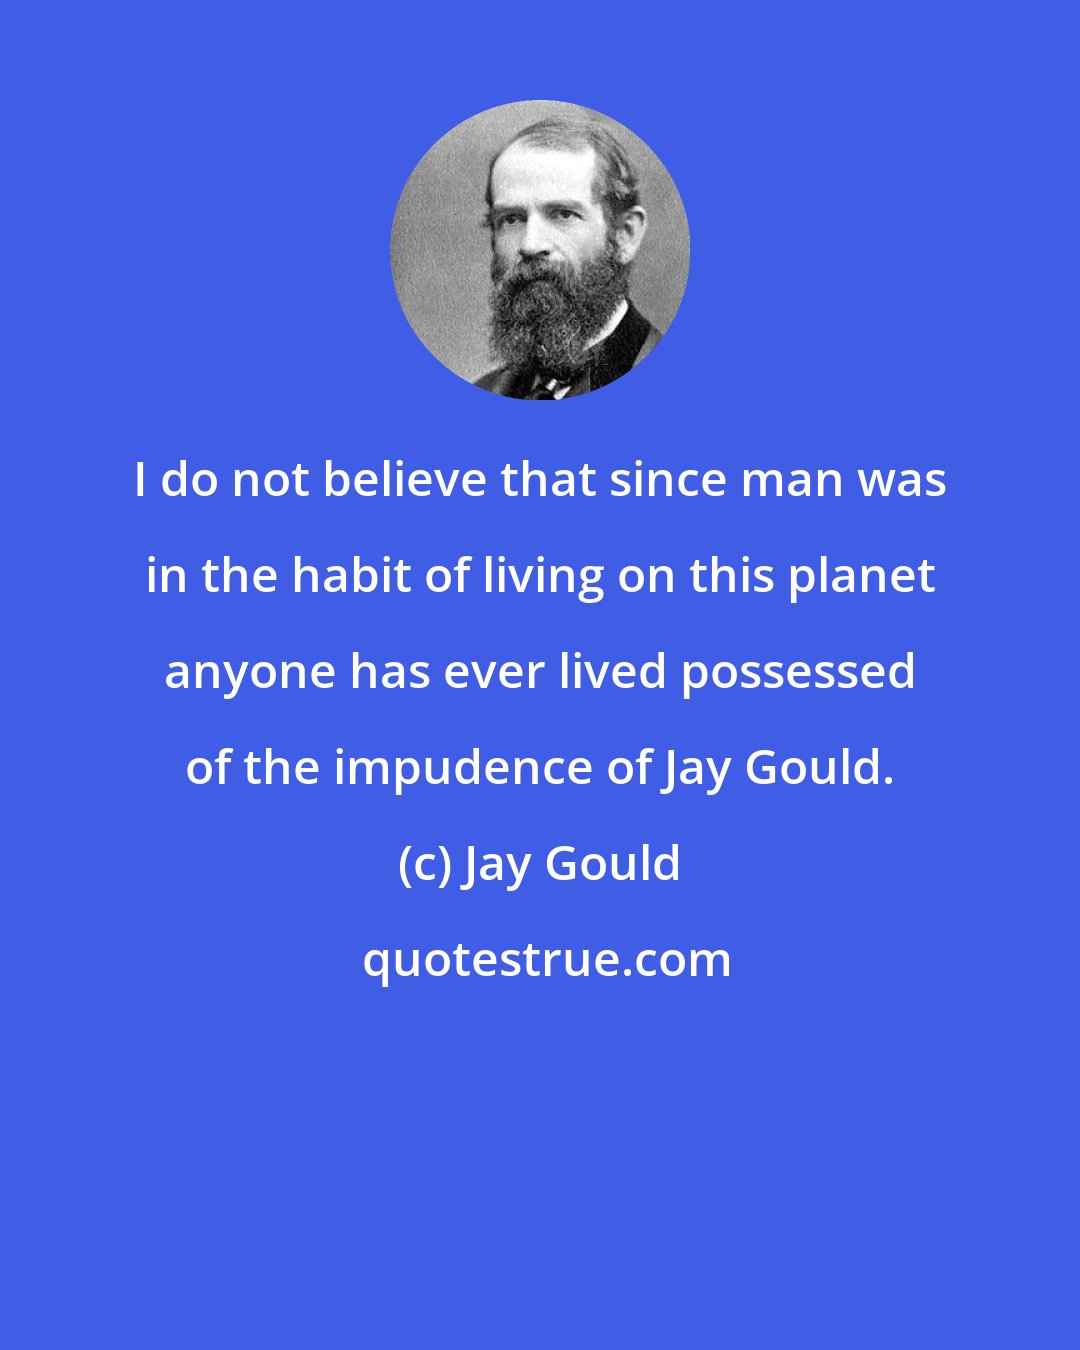 Jay Gould: I do not believe that since man was in the habit of living on this planet anyone has ever lived possessed of the impudence of Jay Gould.